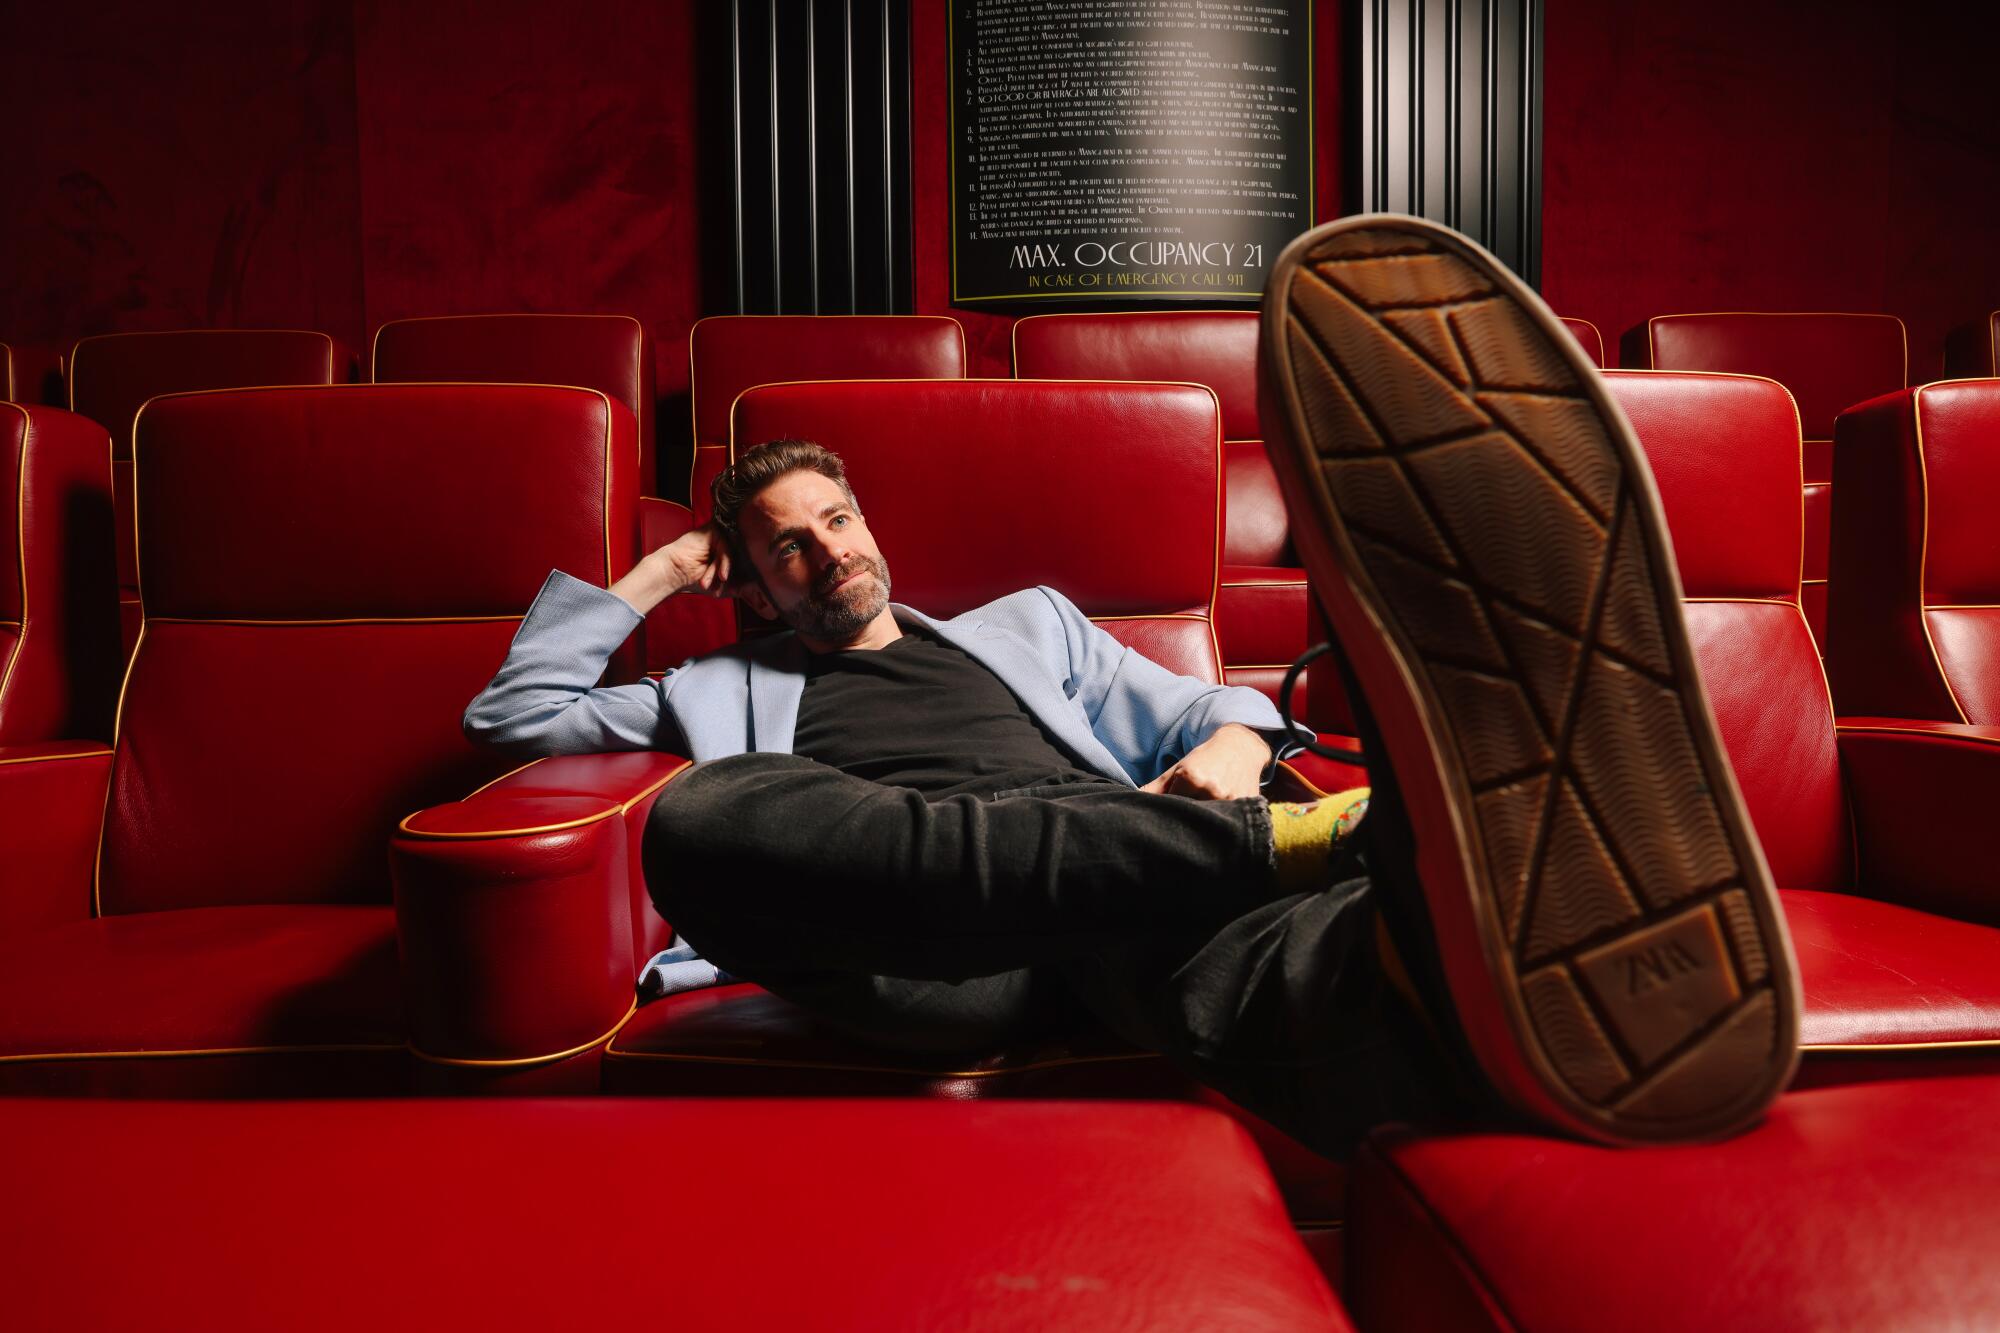 Ben Whitehair reclines  in a theater, foot kicked up in the foreground.